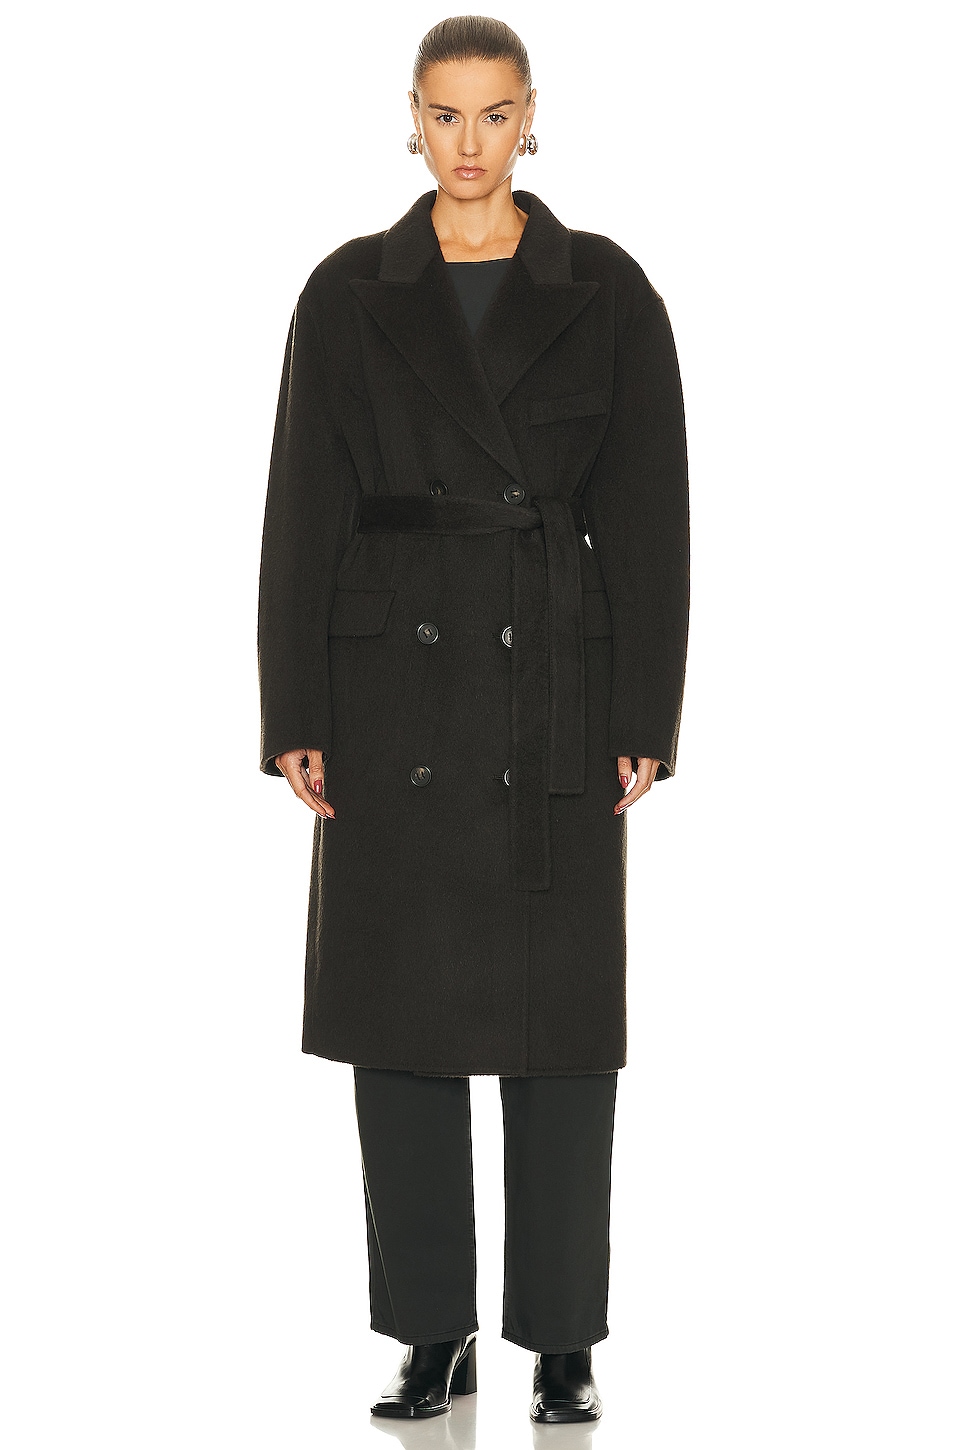 Image 1 of Acne Studios Belted Trench Coat in Charcoal Grey